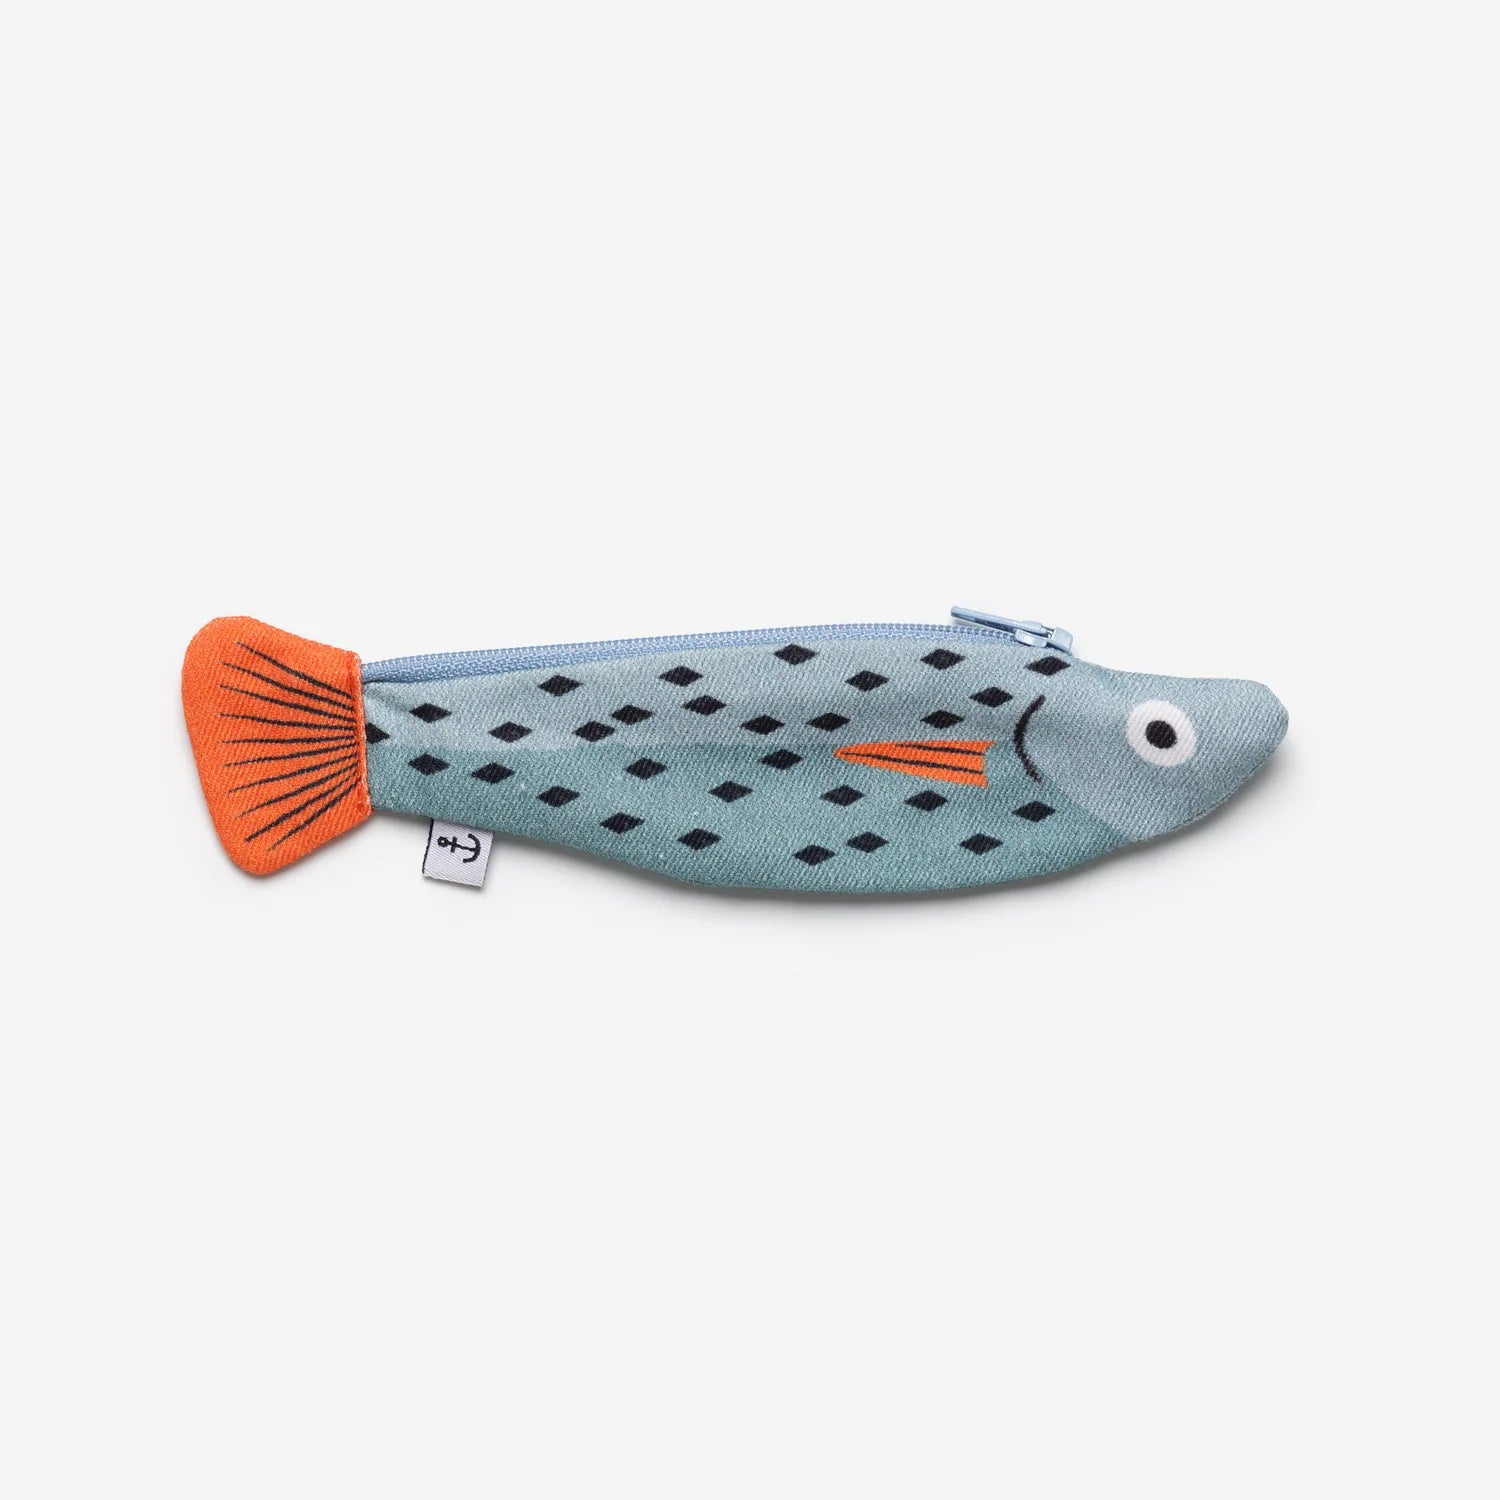 Small Whiting fish zippered pouch. Body is blue with black markings, fins are orange with stripes 